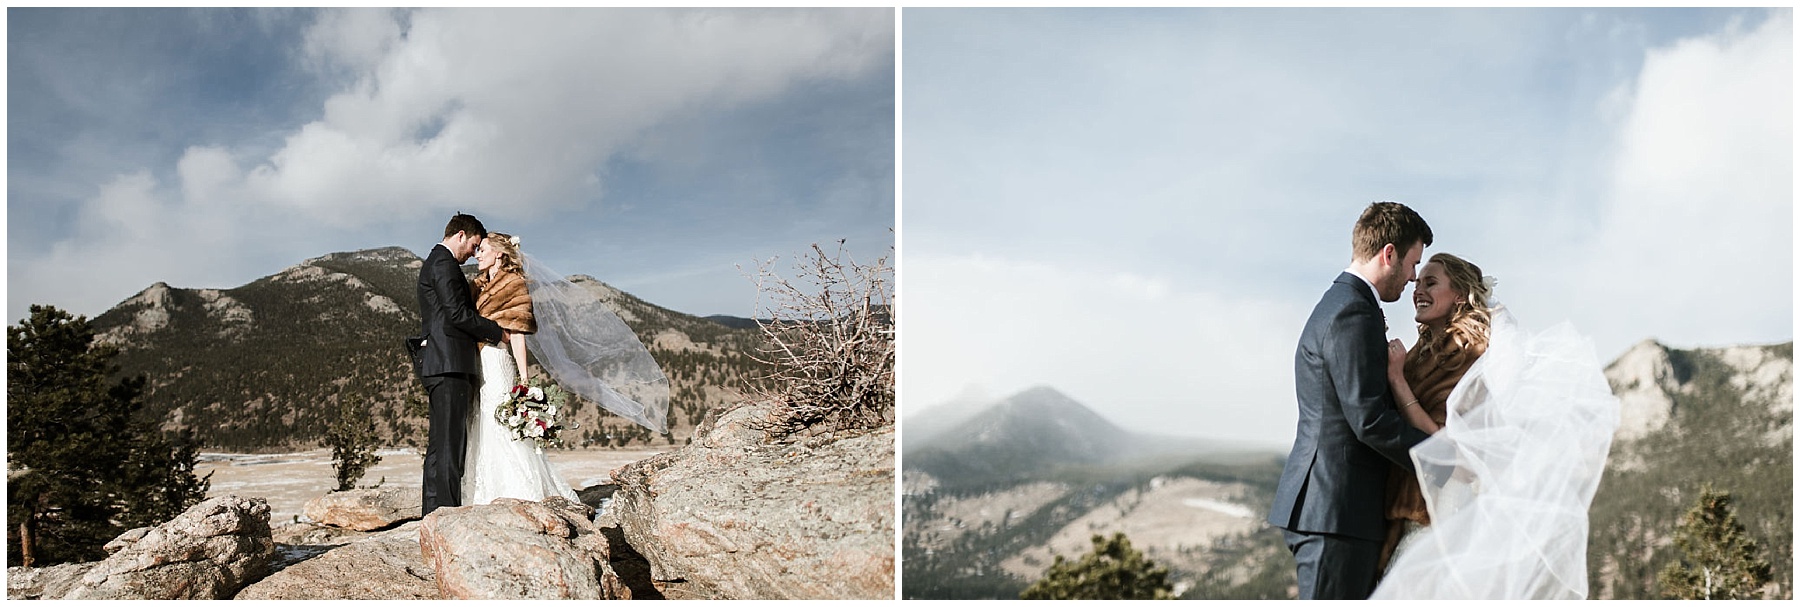 Katesalleyphotography-201_Haley and Dan get married in Estes Park.jpg